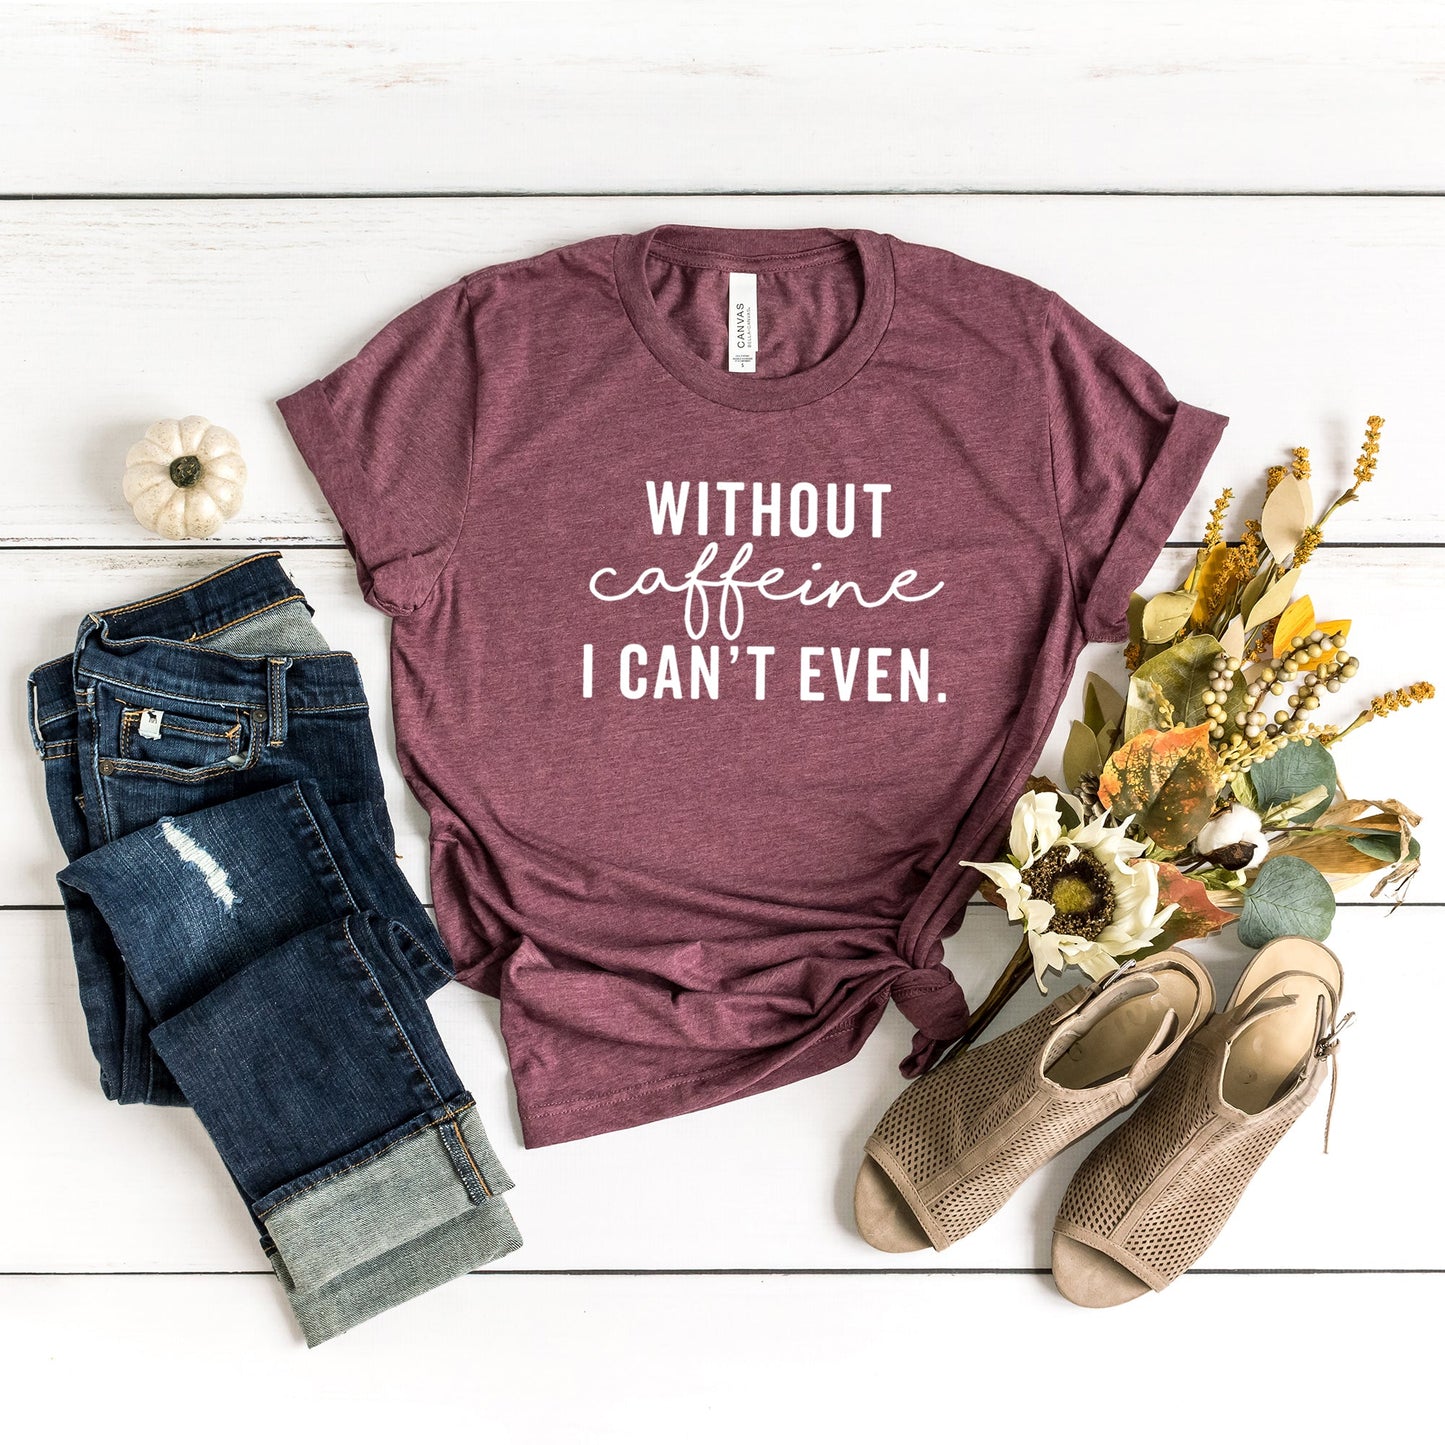 Without Caffeine I Can't Even | Short Sleeve Crew Neck